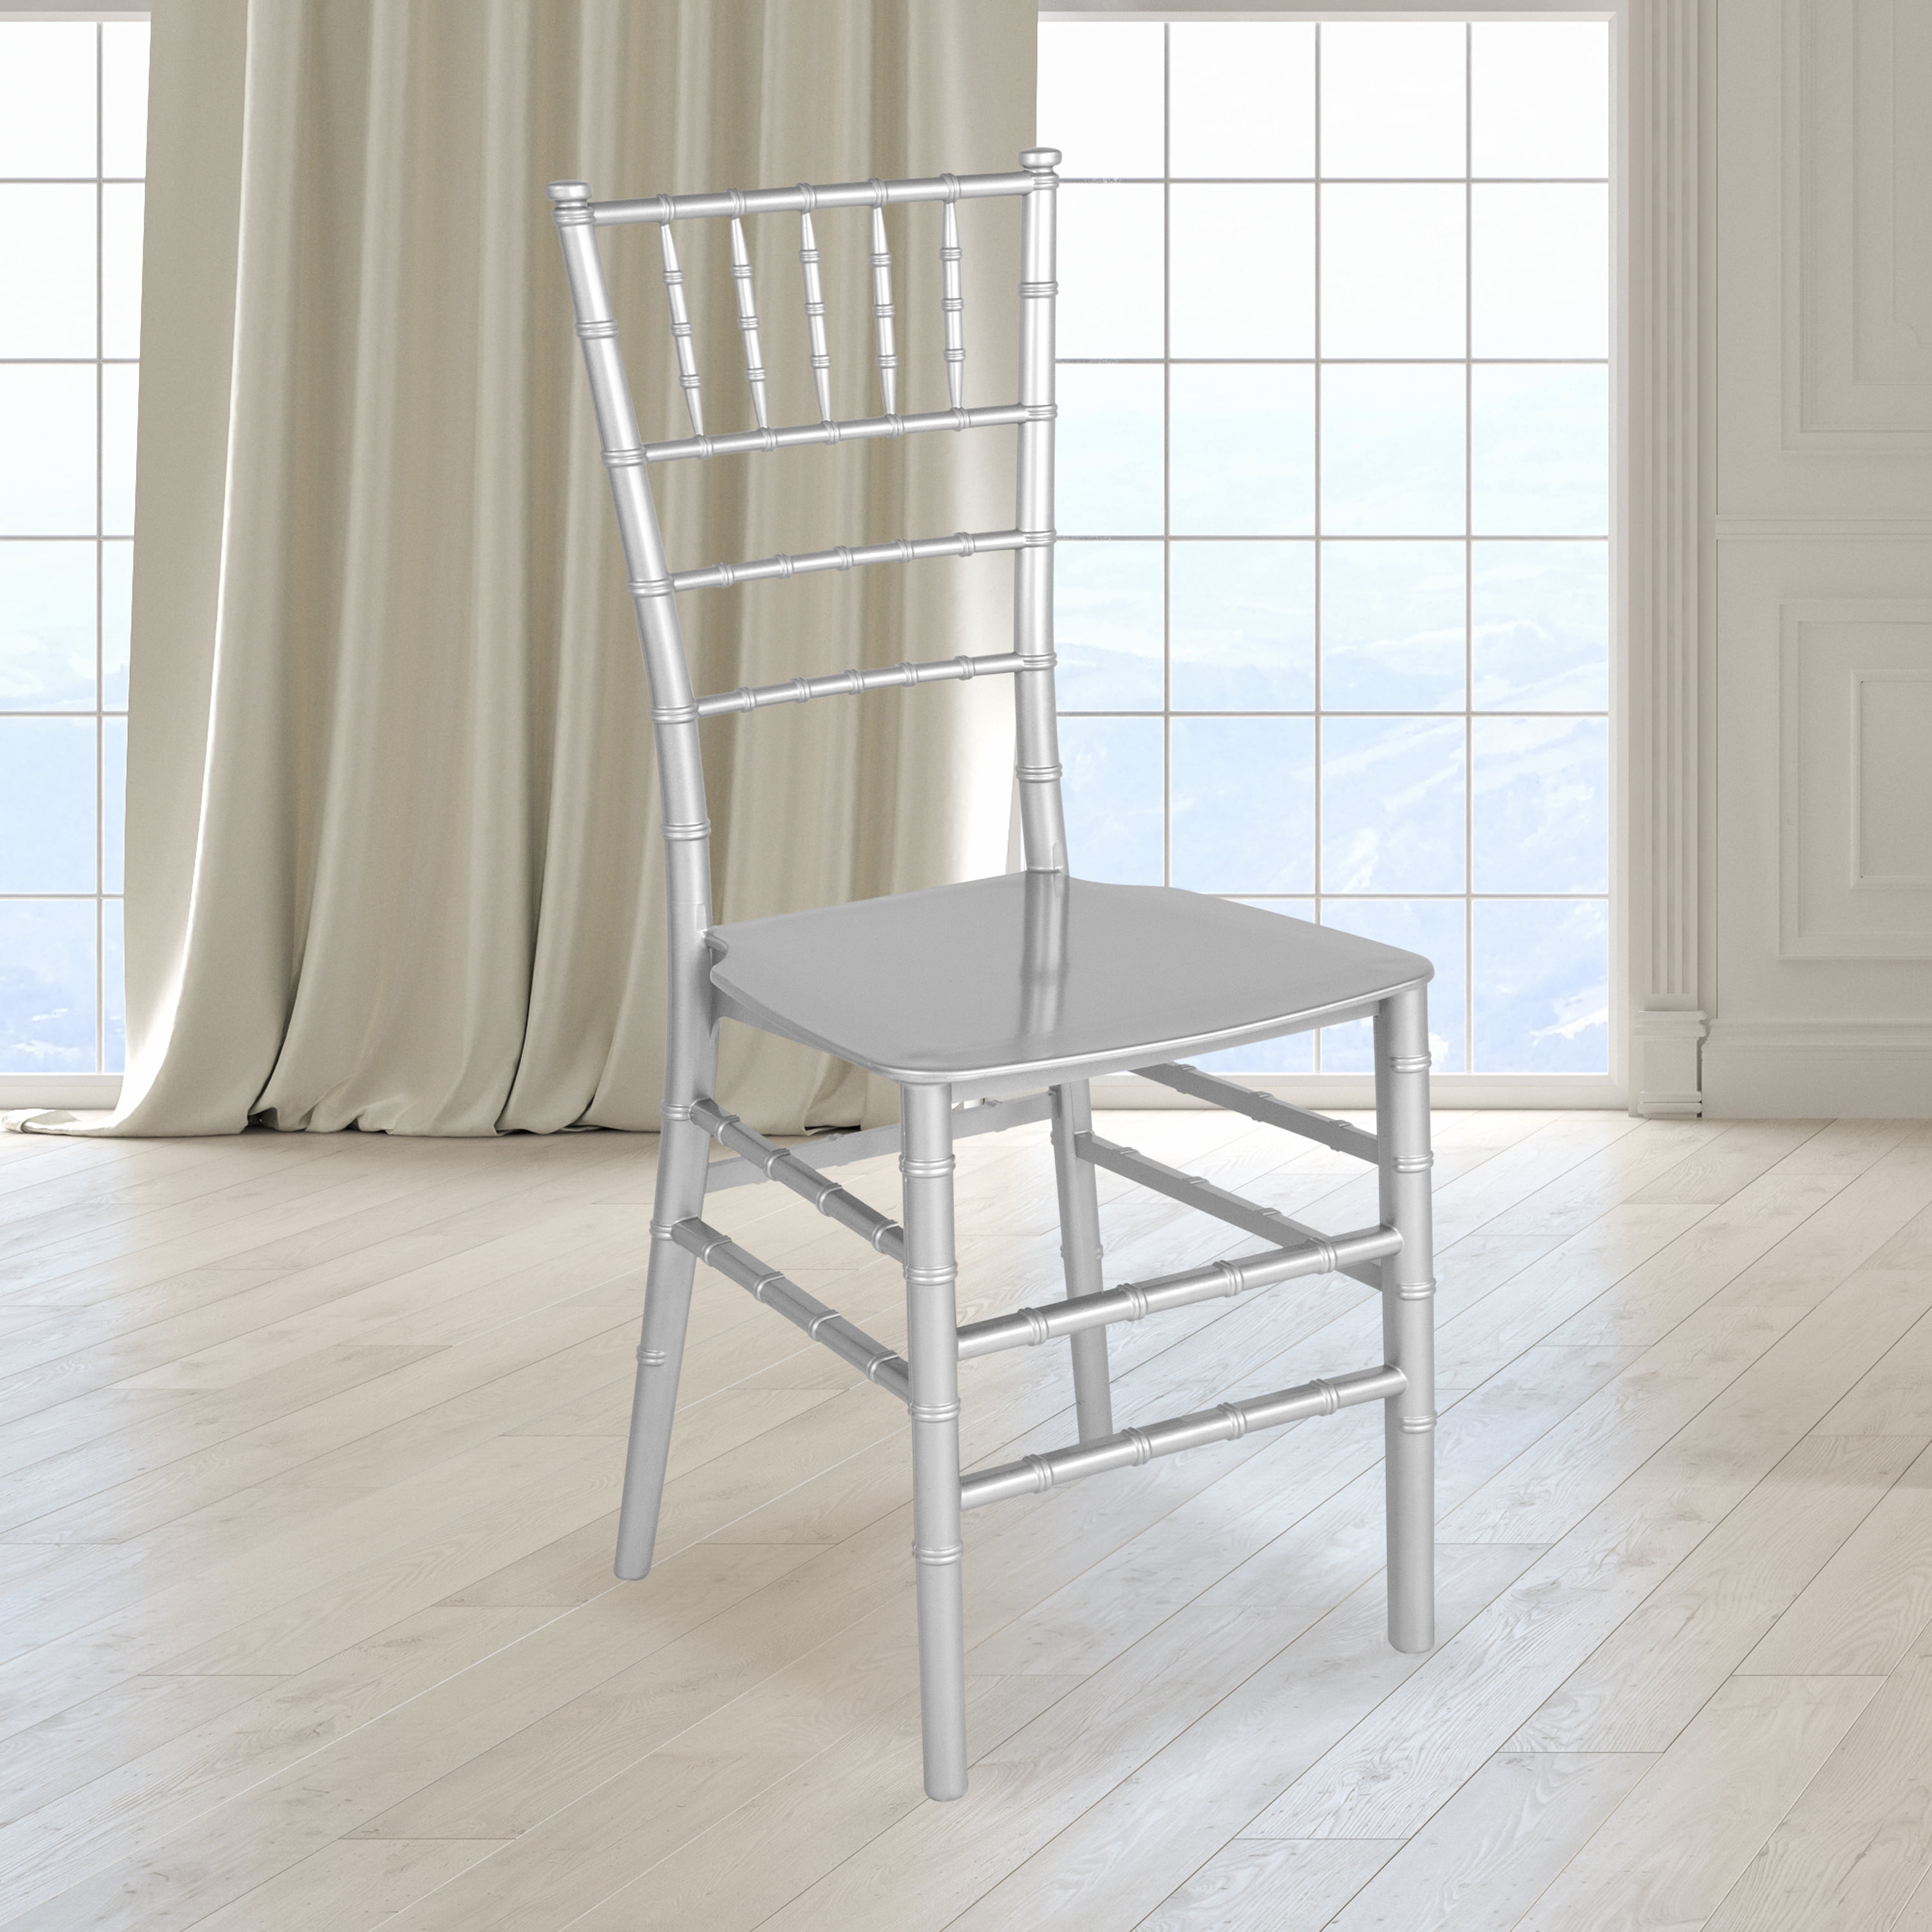 Commercial Quality Wedding Chair Crystal Clear Resin Stacking Chiavari Chair for Special Events & Weddings 